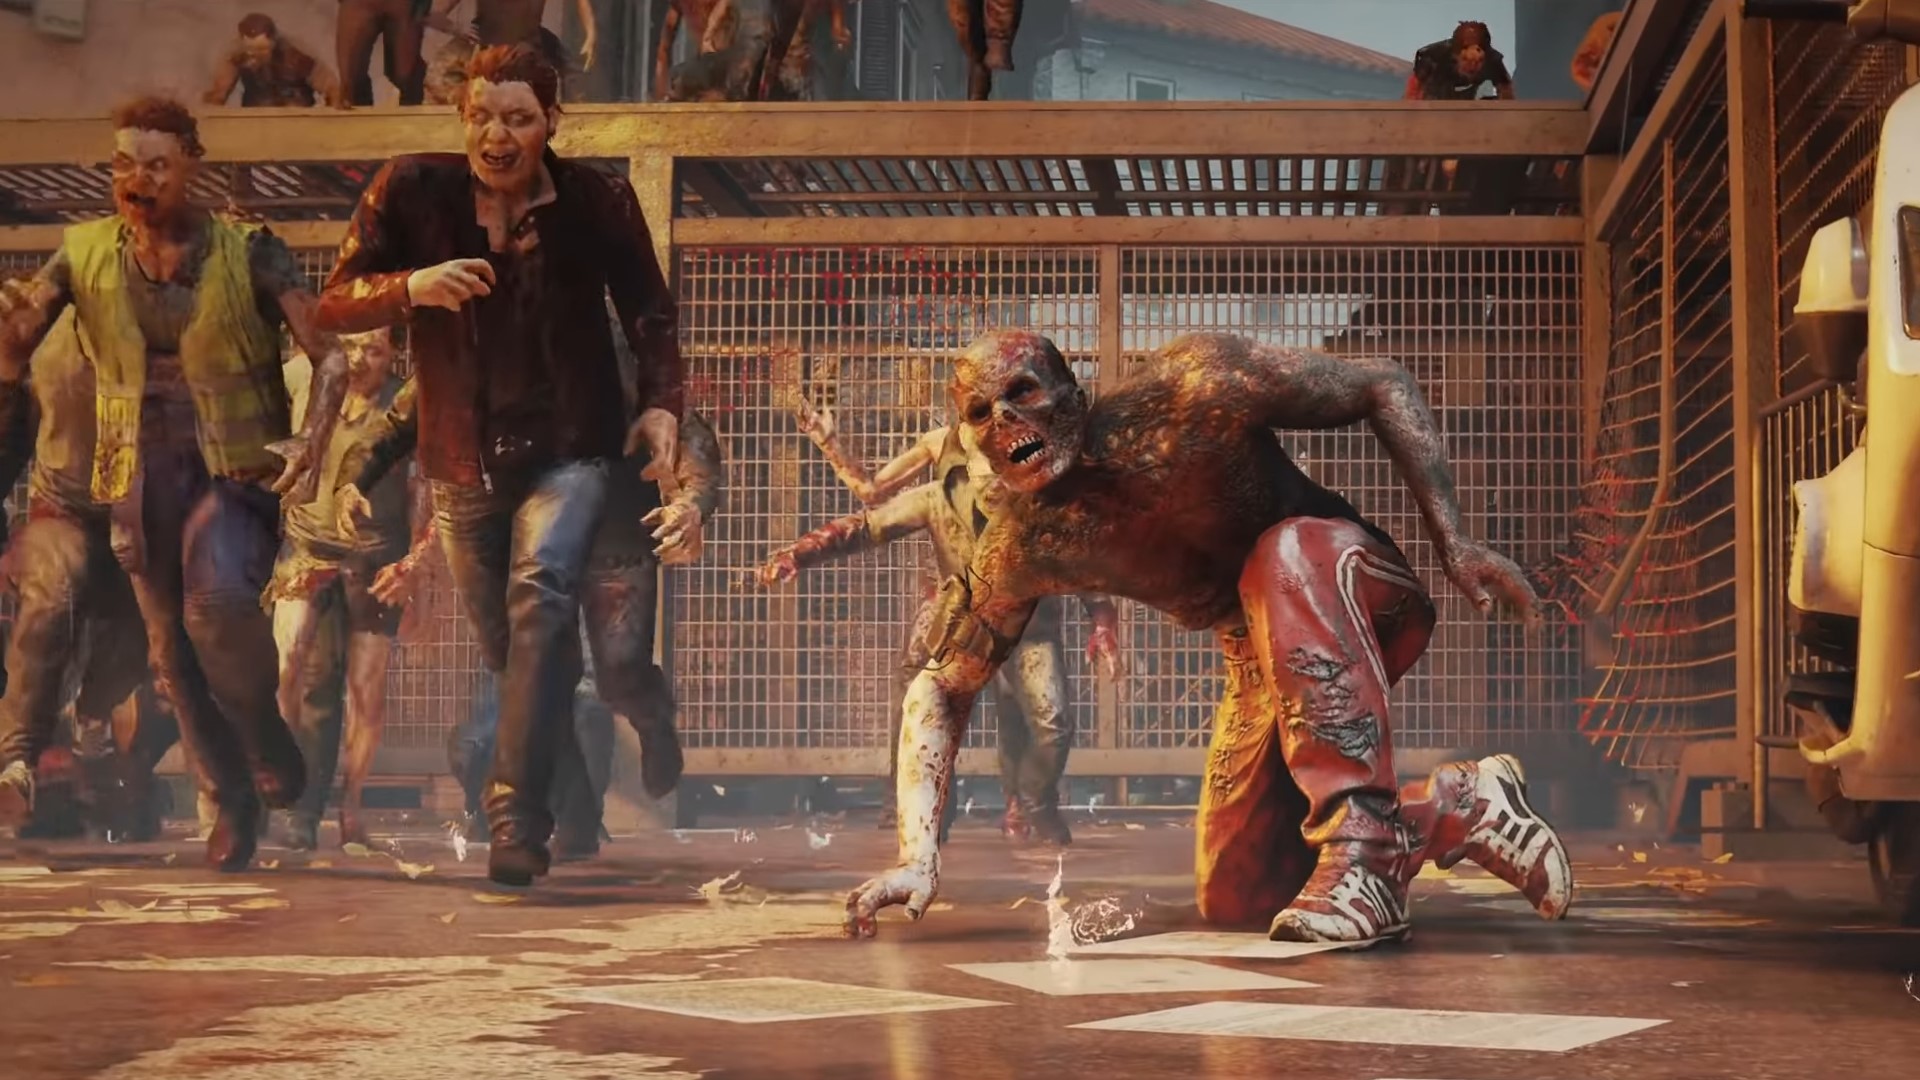 World War Z: Aftermath's First Big Update Adds a New Zombie Type